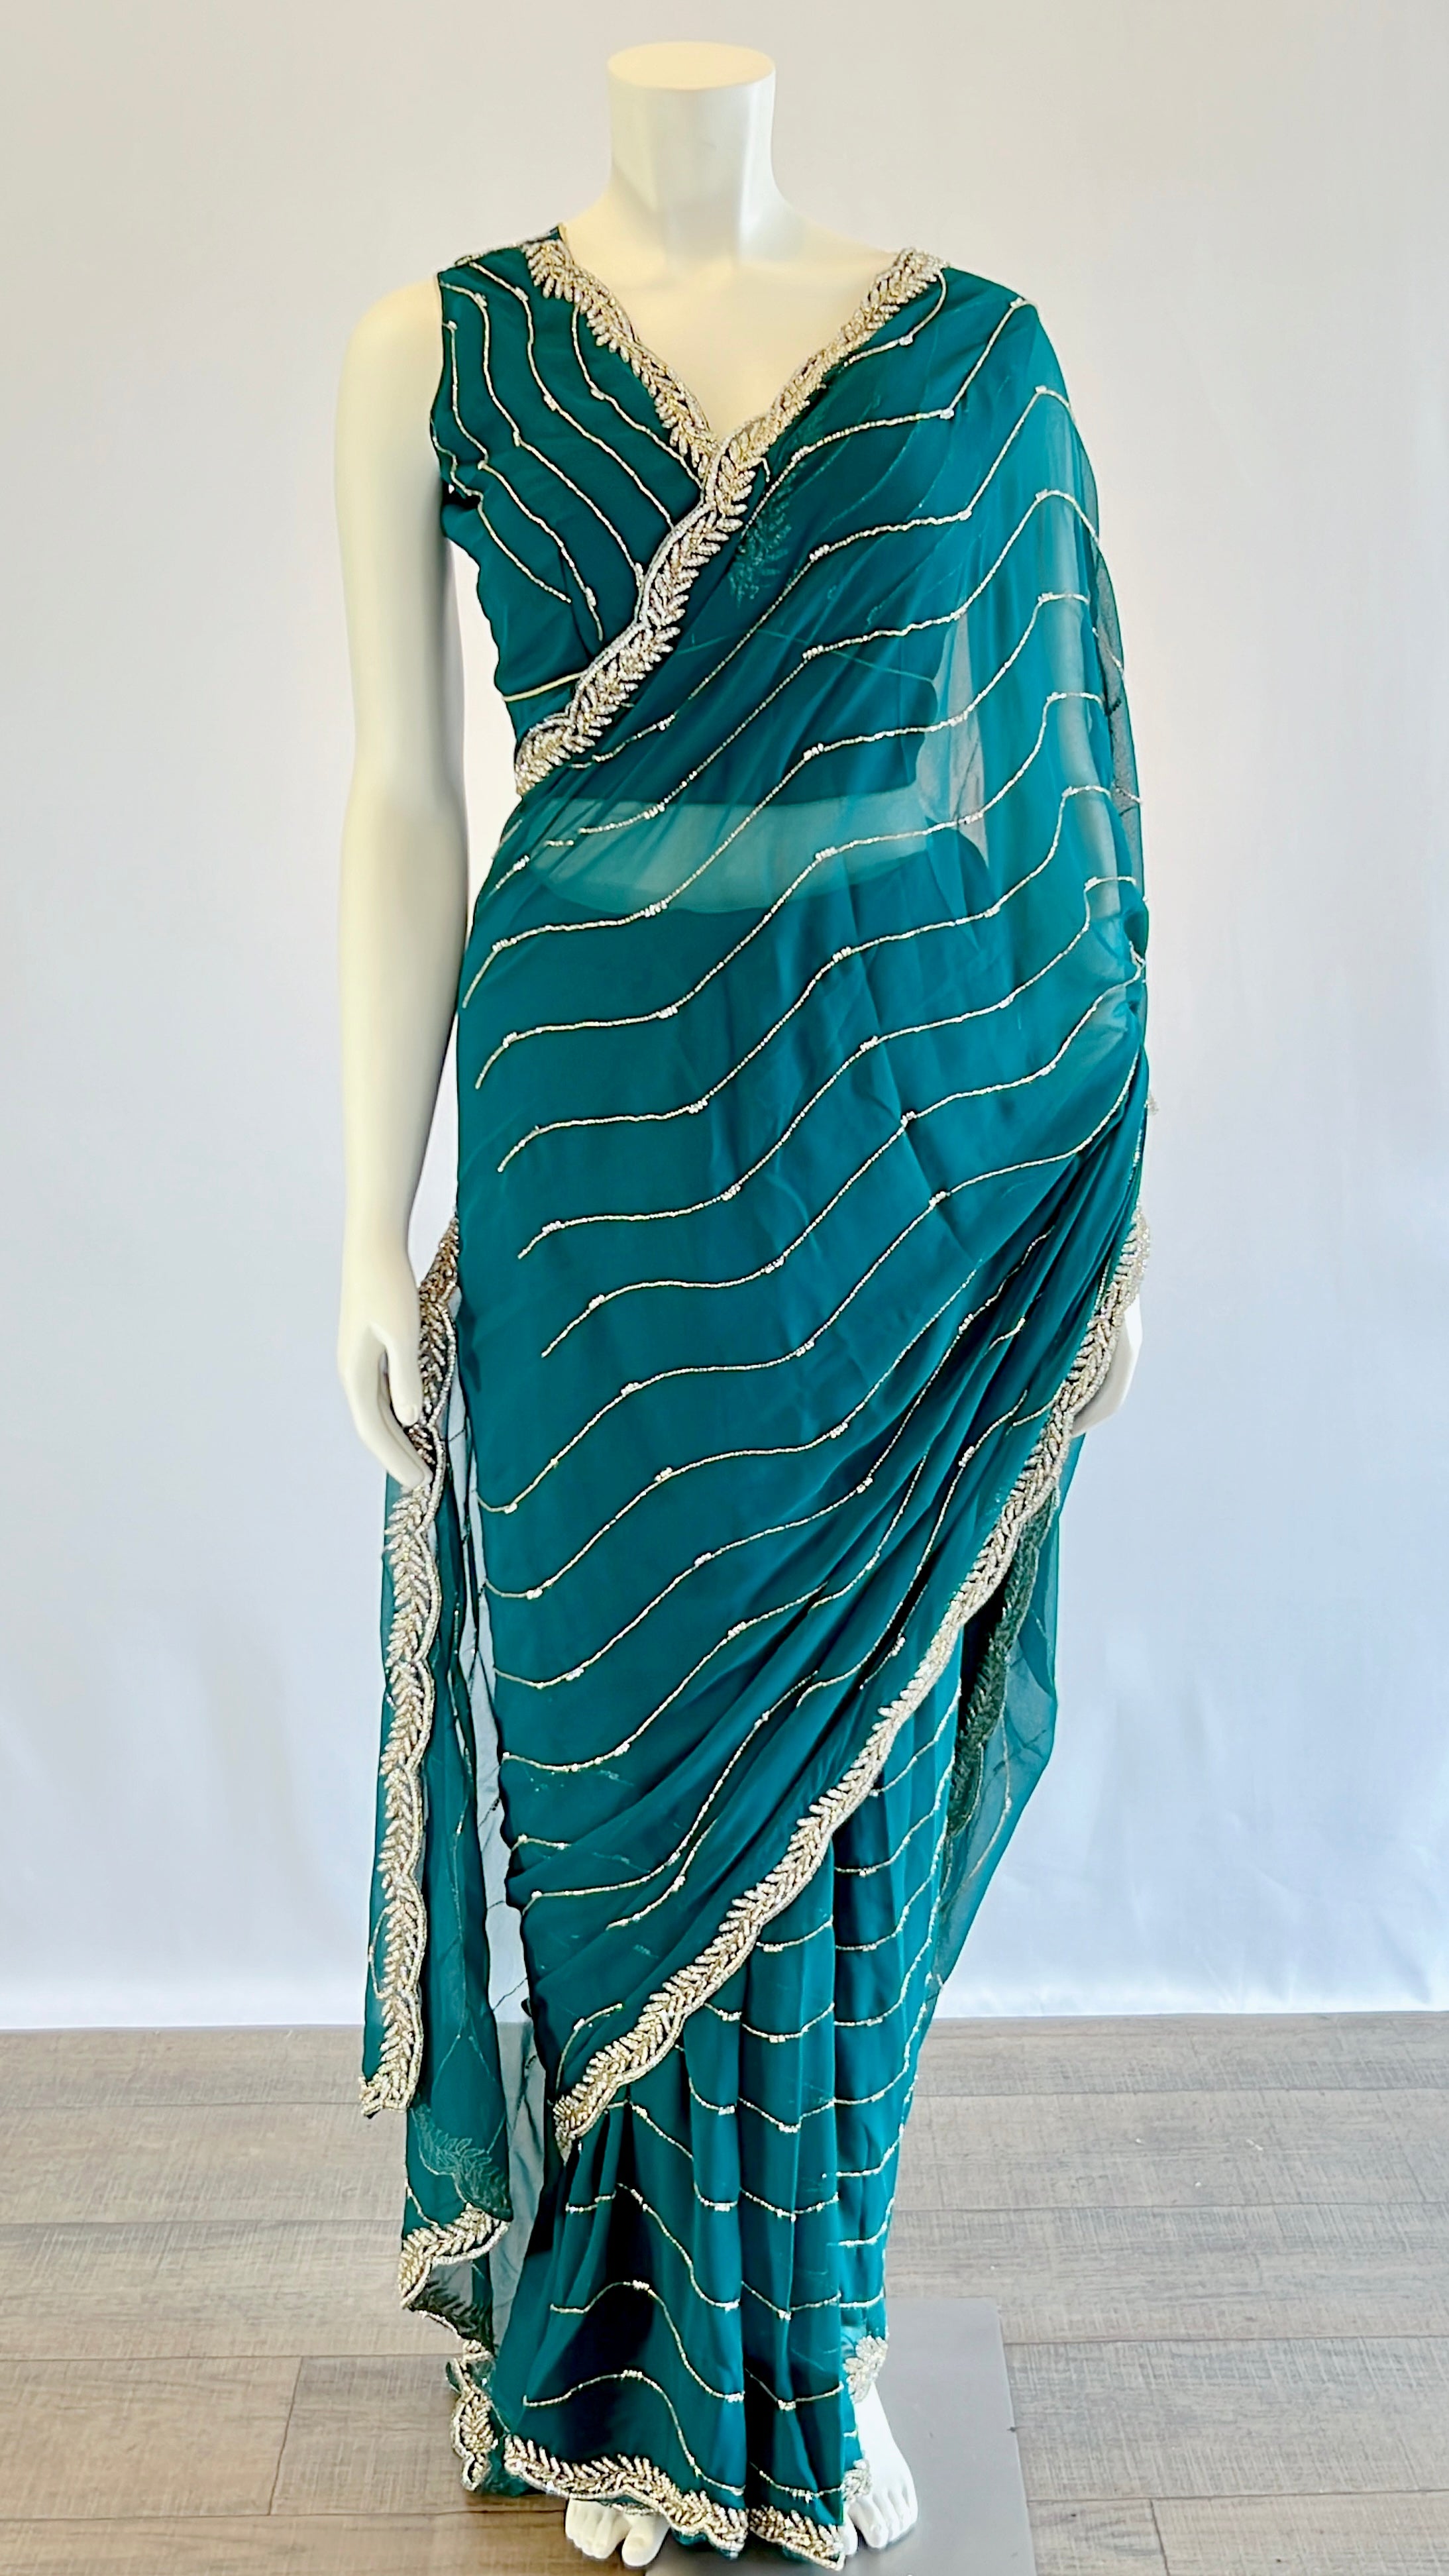 Teal Georgette Ready-to-Wear Saree with Stitched Blouse - Effortless Style and Elegance | Shop Now